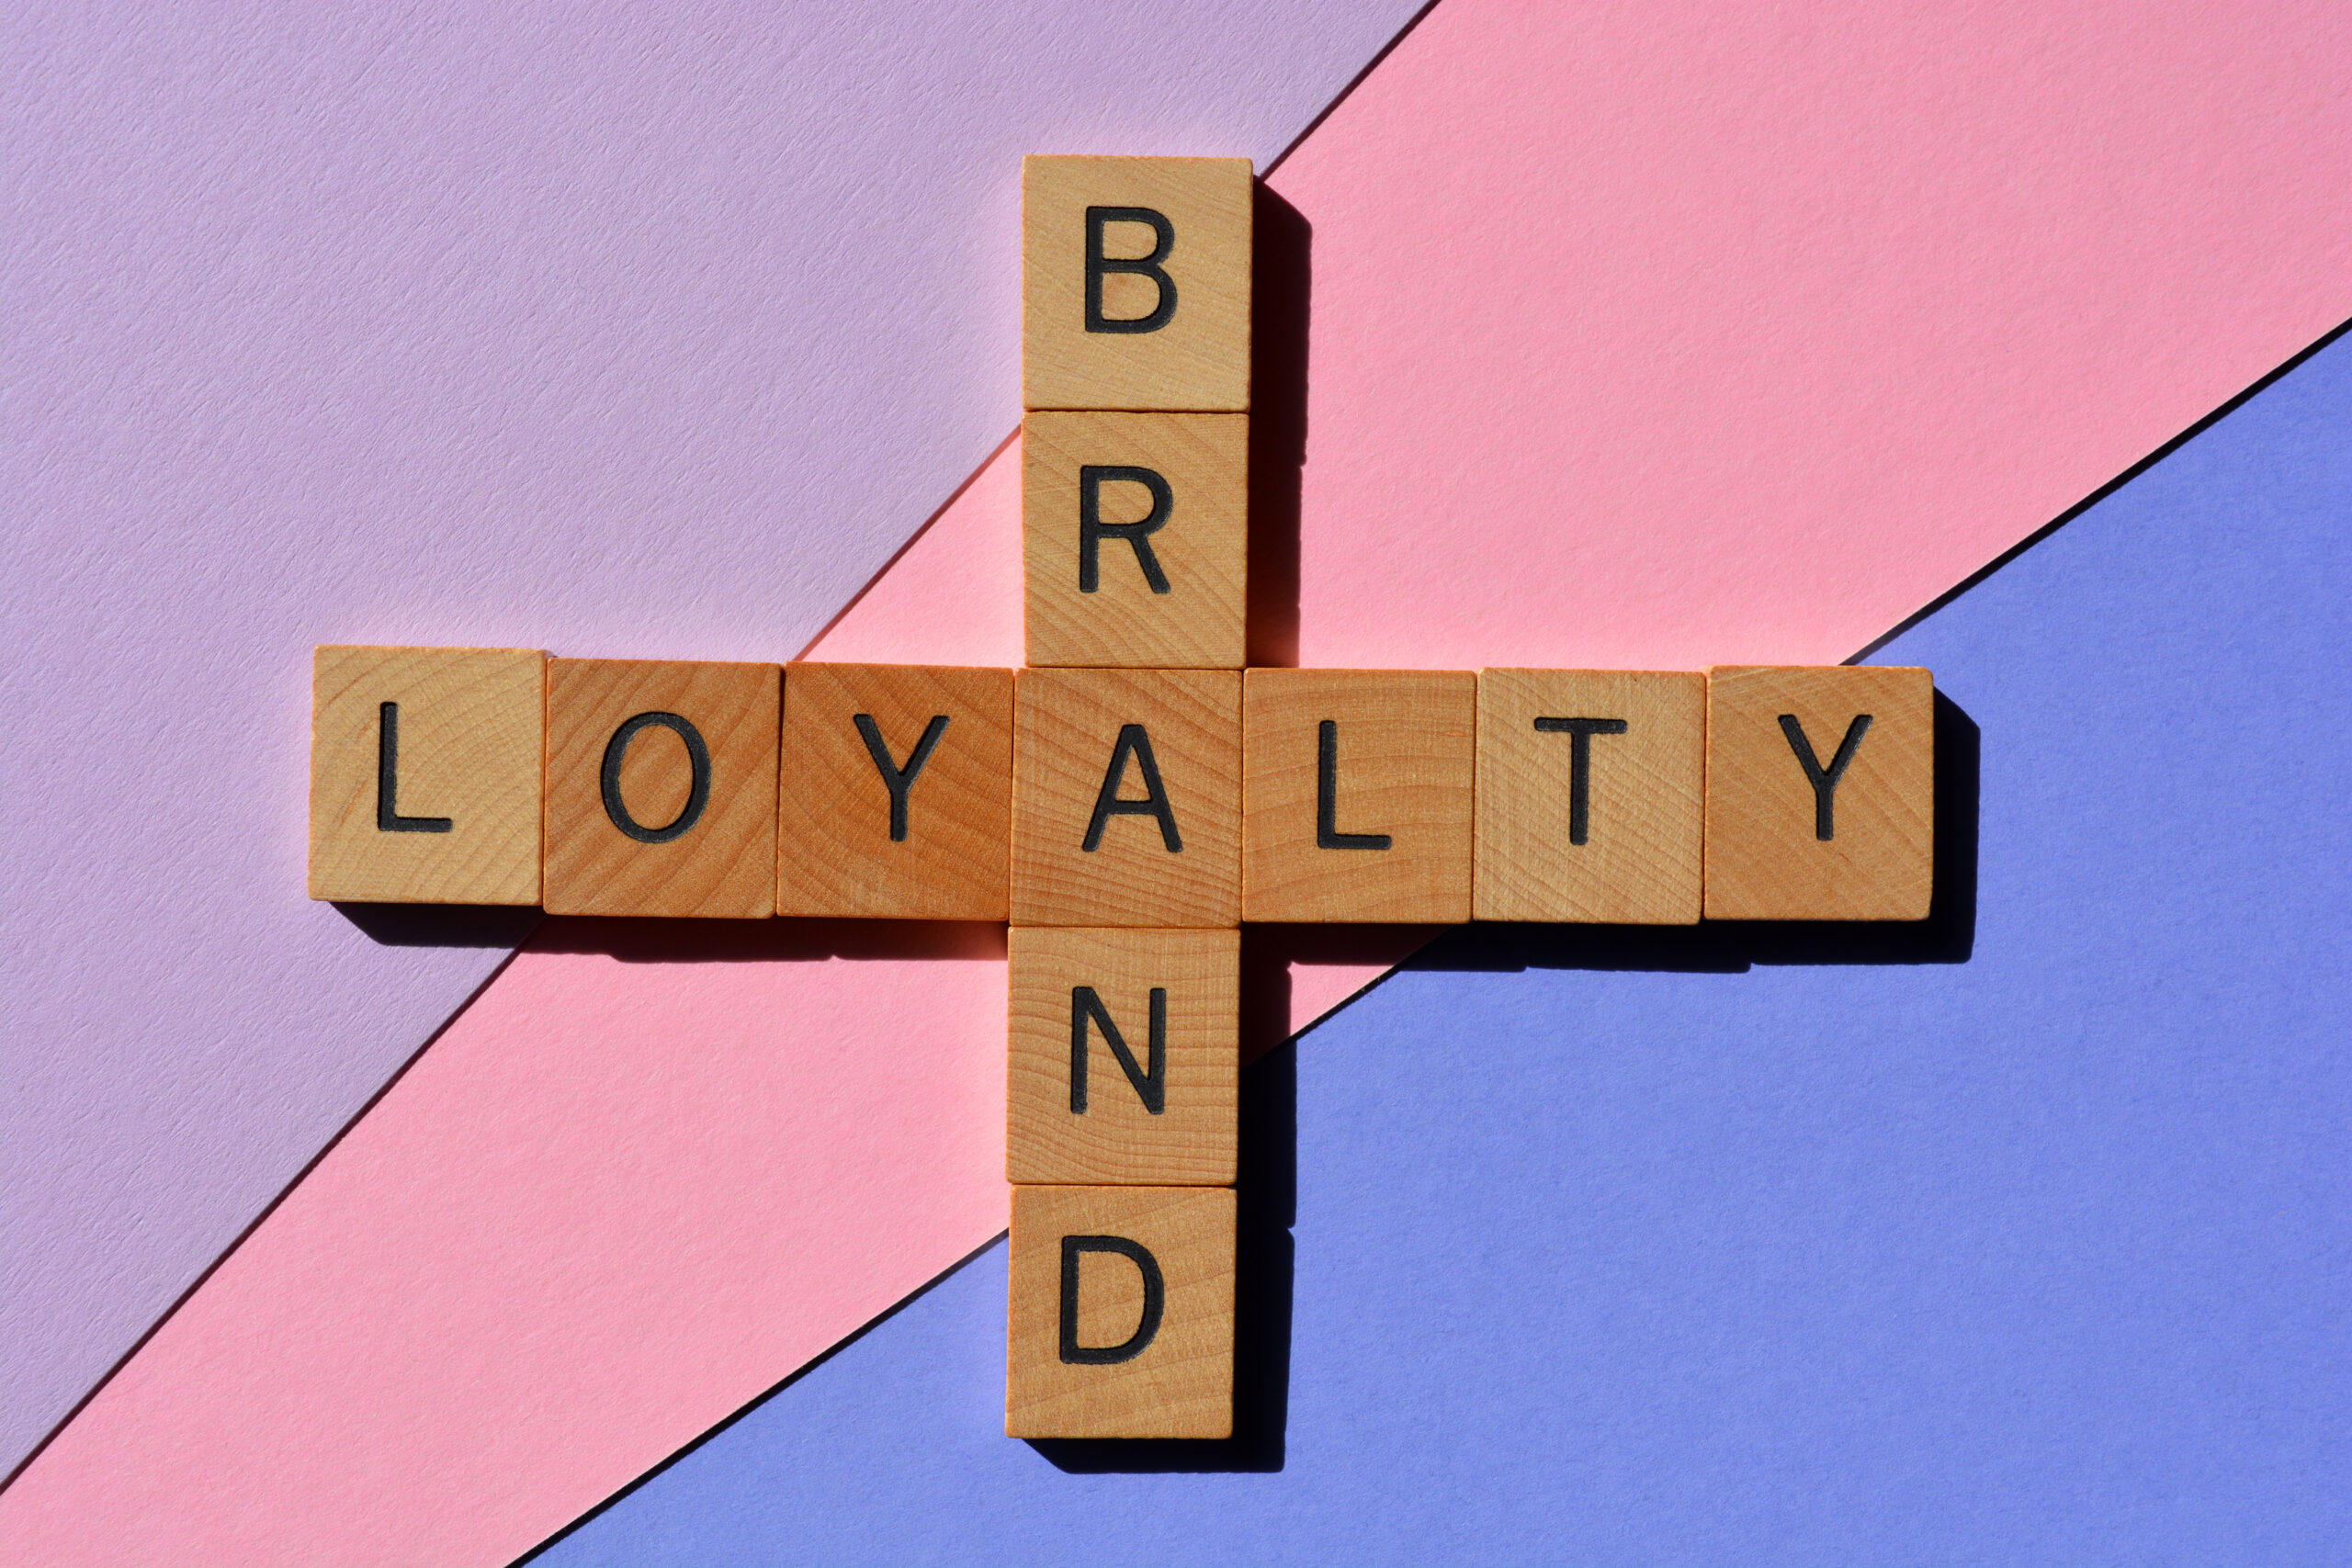 Consumer Engagement: A Game of Sales & Loyalty